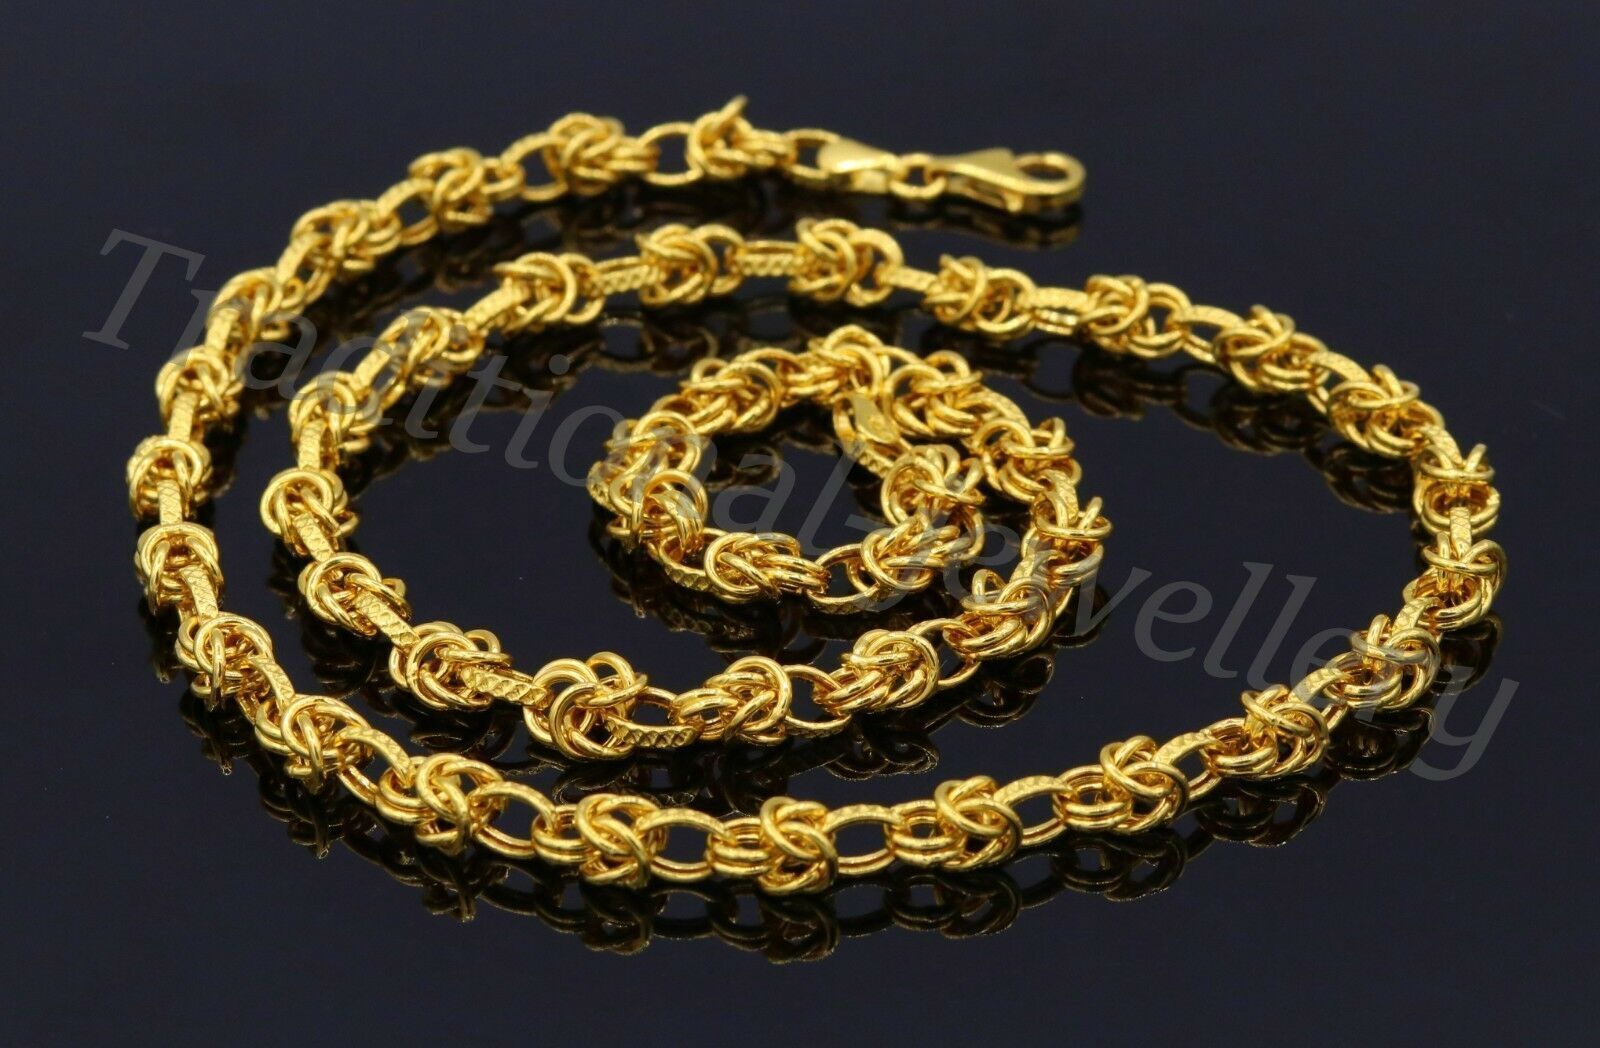 Primary image for 22 Kt Yellow Rolo Link Chain With Byzantine Design Hallmark Sign Necklace Indian